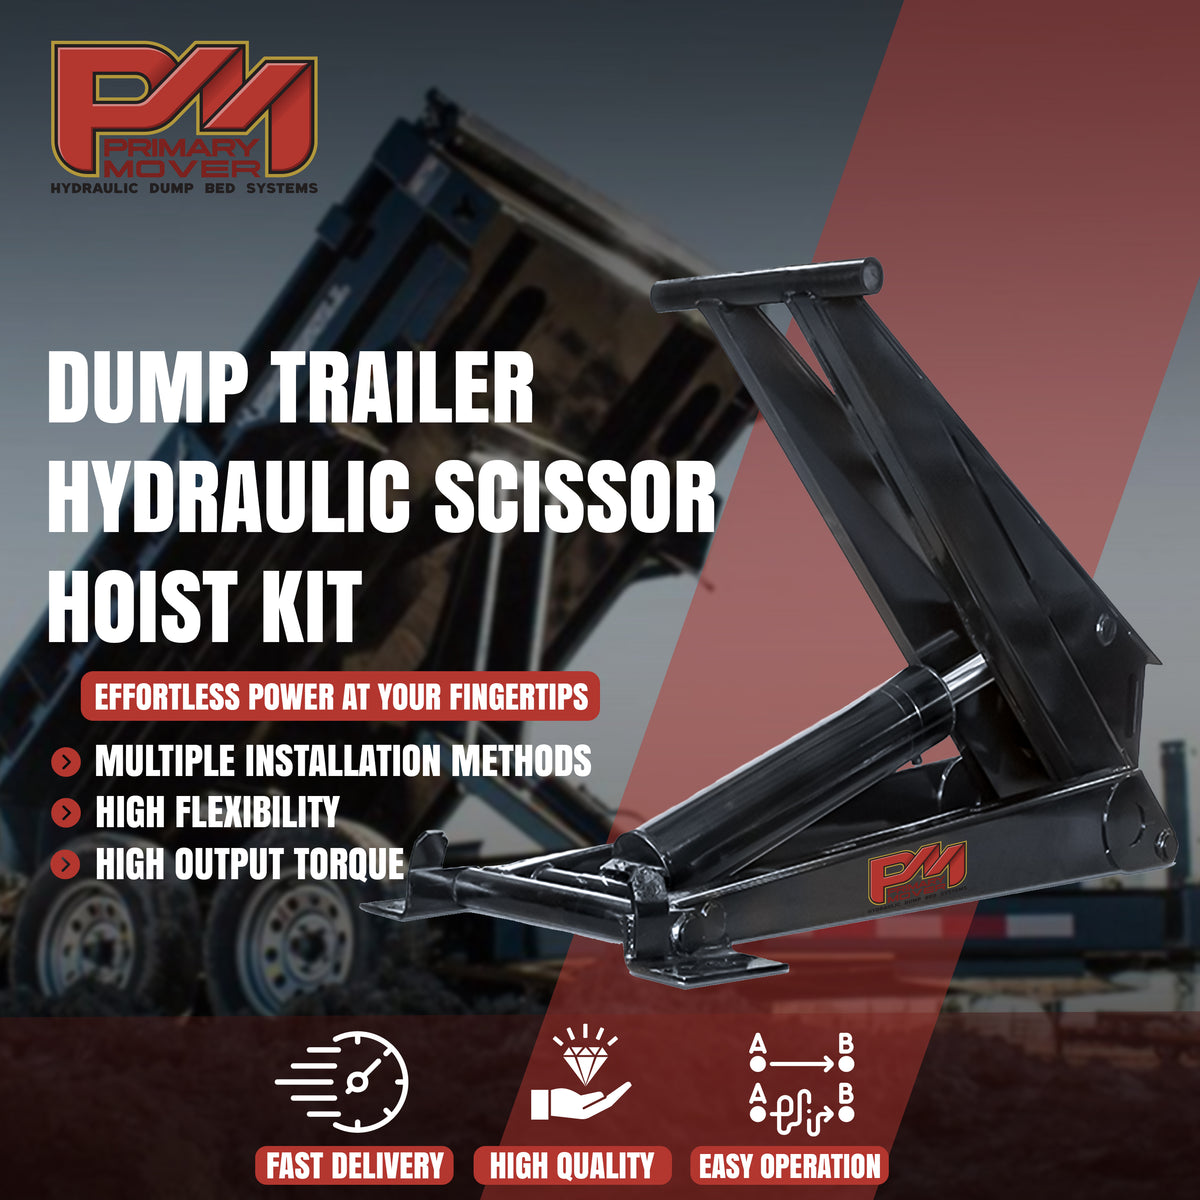 Hydraulic Scissor Hoist Kit - 12 Ton Capacity - Fits 16-20' Dump Body | PF-625: Reliable, durable dump trailer hoist with 3-year warranty. Includes cylinder, mounting brackets, hydraulic pump, safety features, and more.